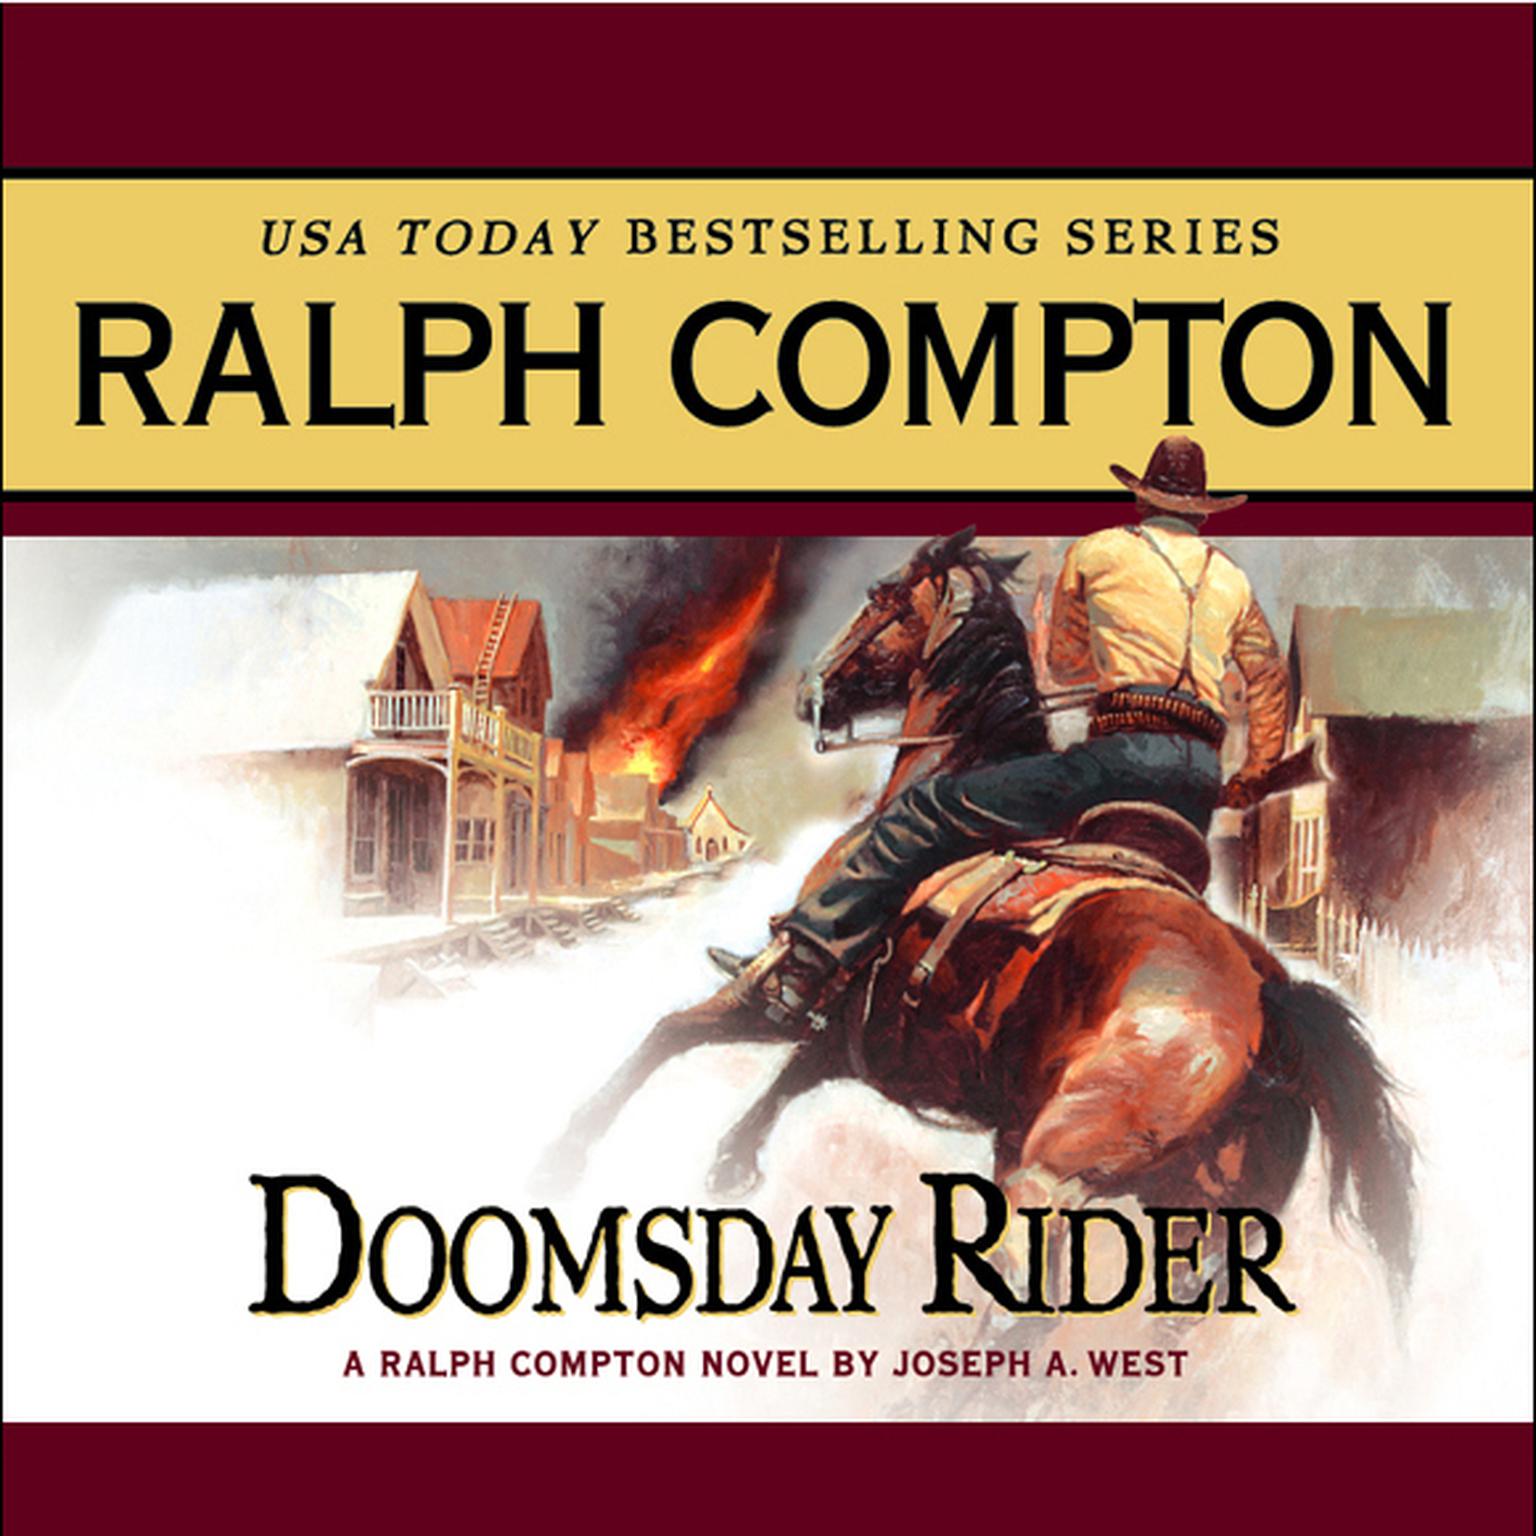 Doomsday Rider (Abridged): A Ralph Compton Novel by Joseph A. West Audiobook, by Ralph Compton